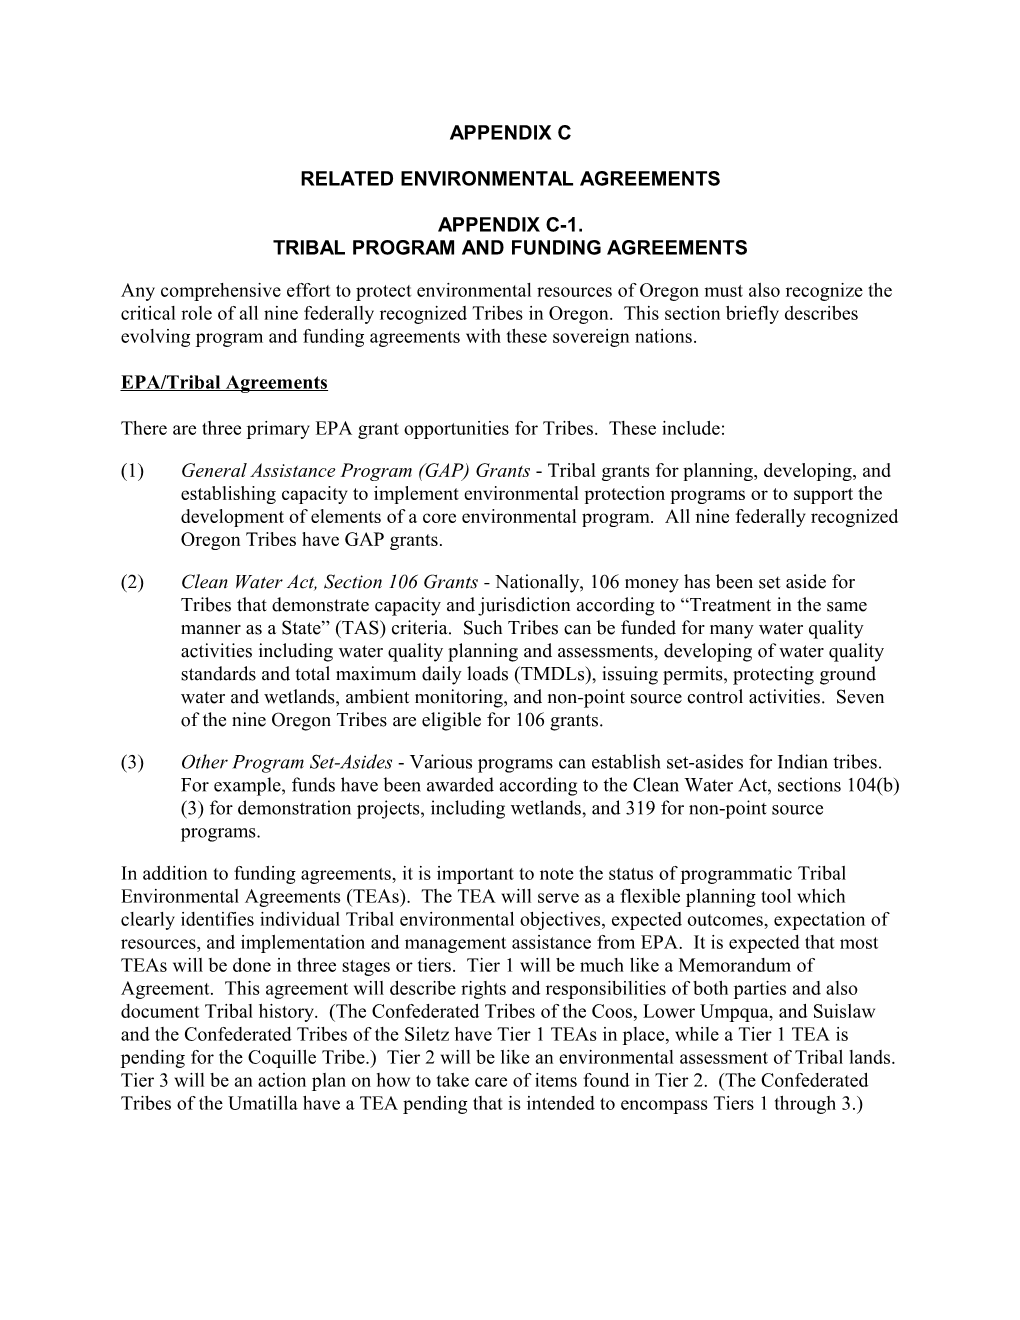 Tribal Program and Funding Agreements